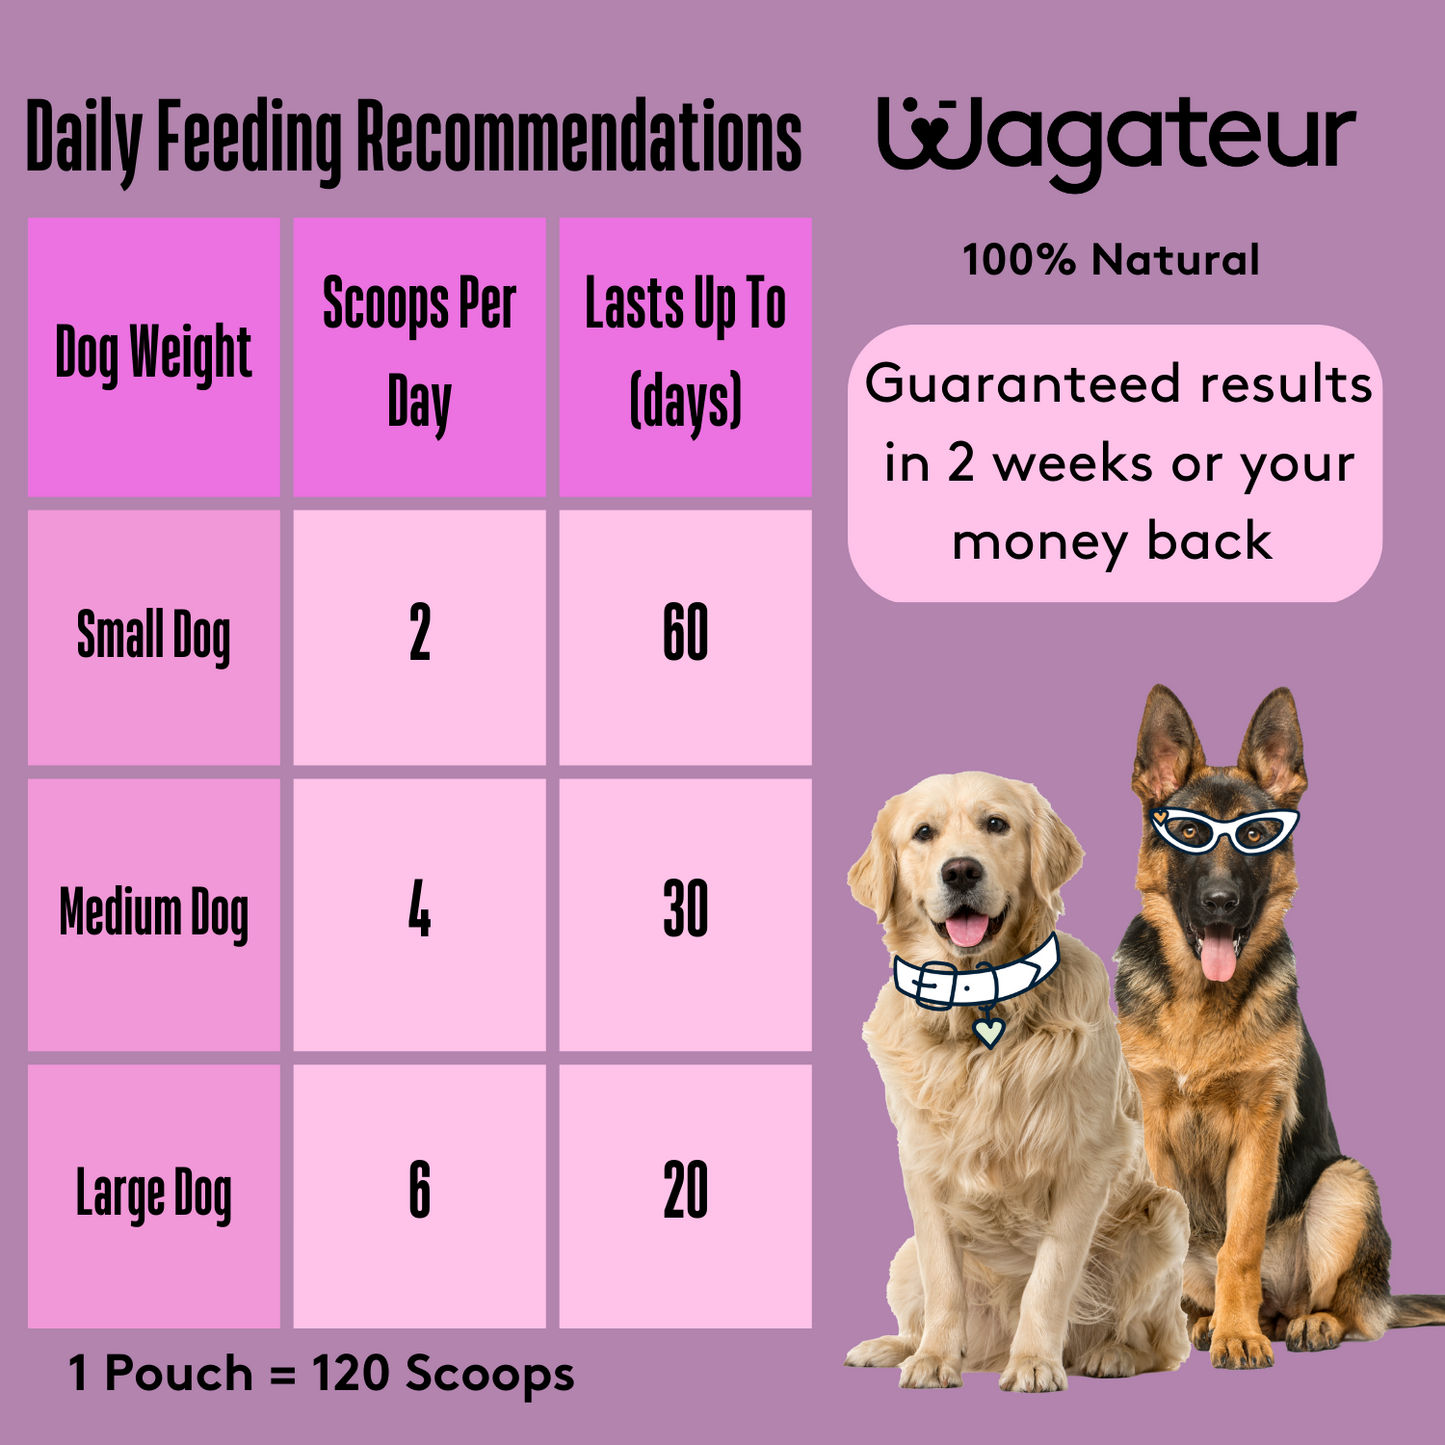 how to feed supplements to my dog